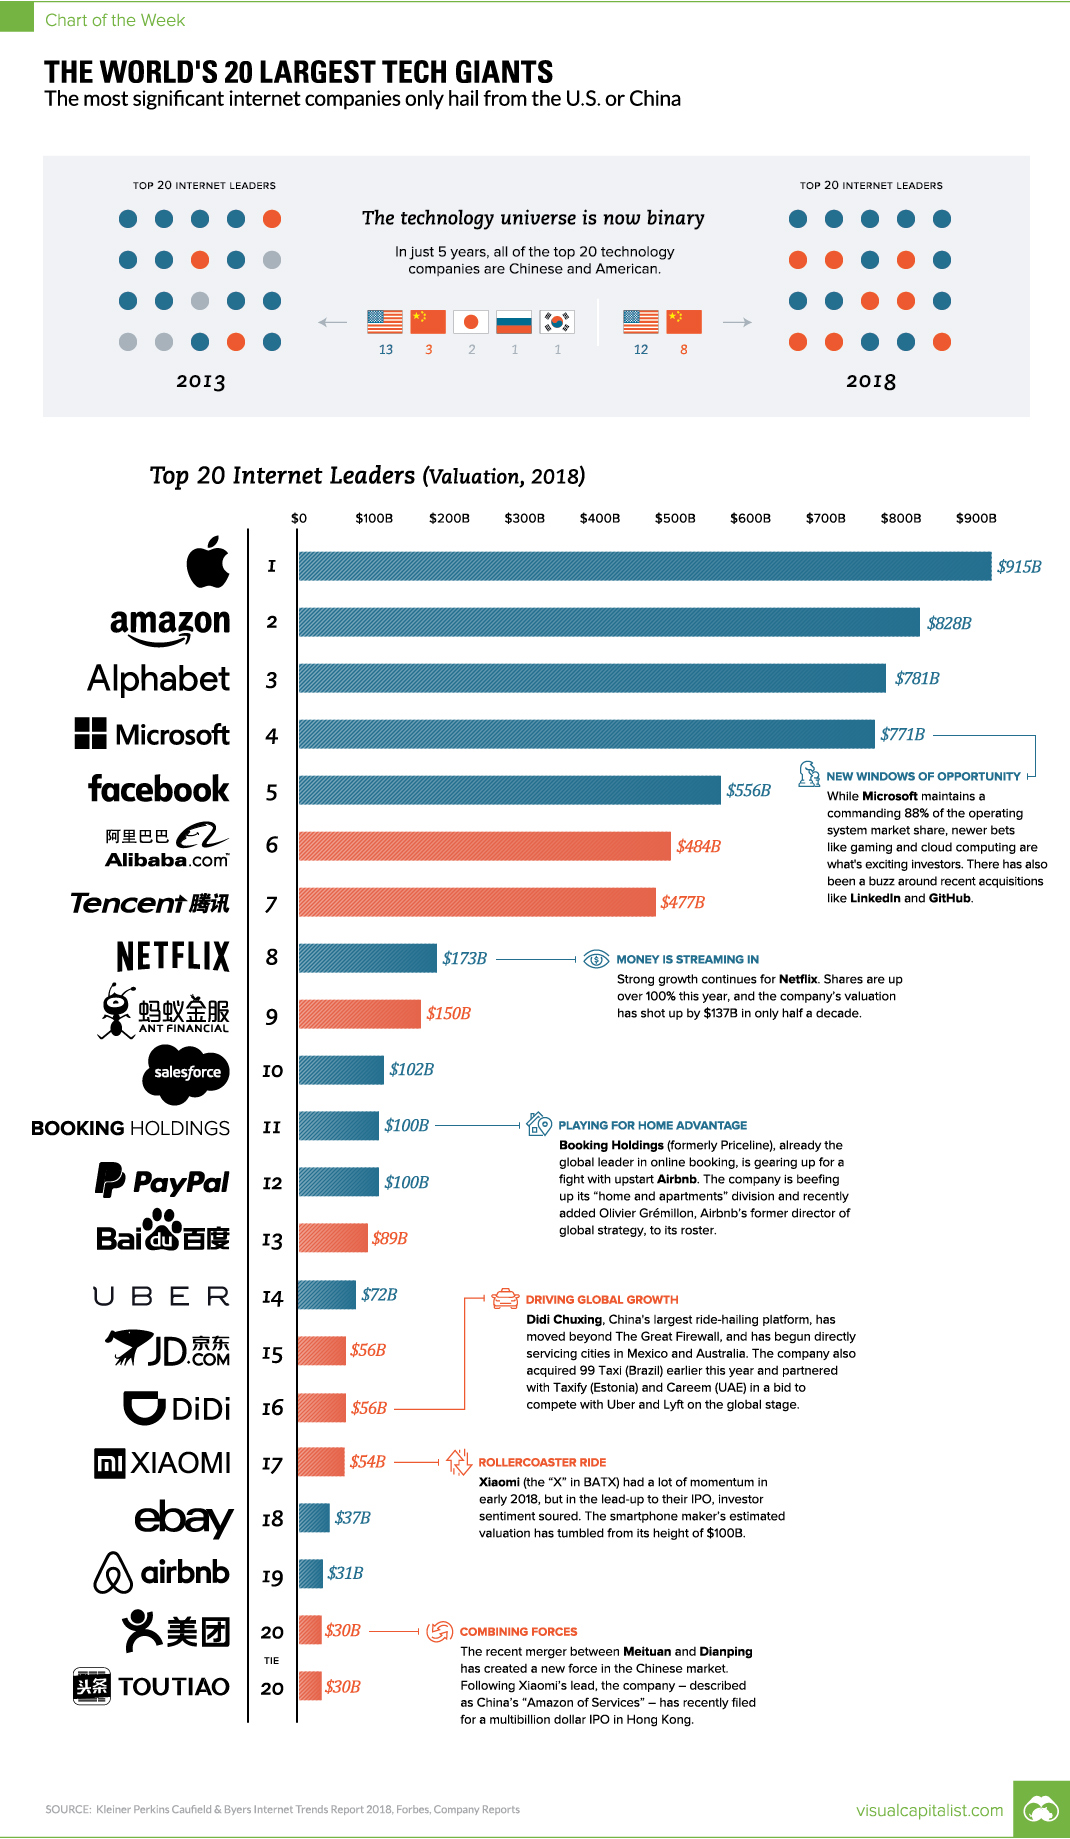 Visualizing The World's 20 Largest Tech Giants